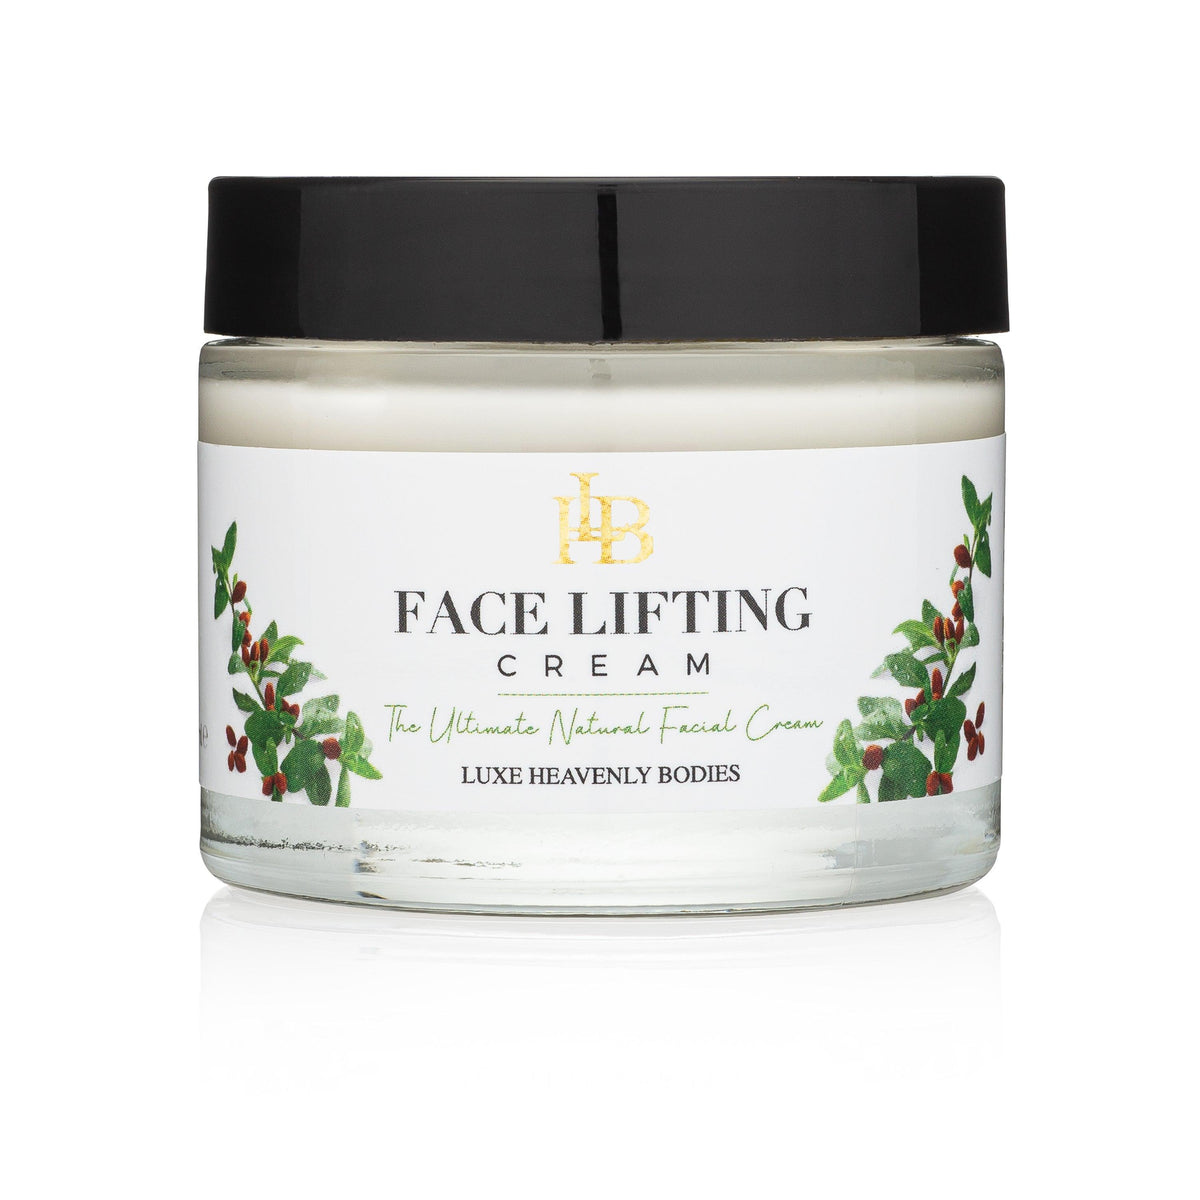 Face Lifting Cream - LUXE Heavenly Bodies